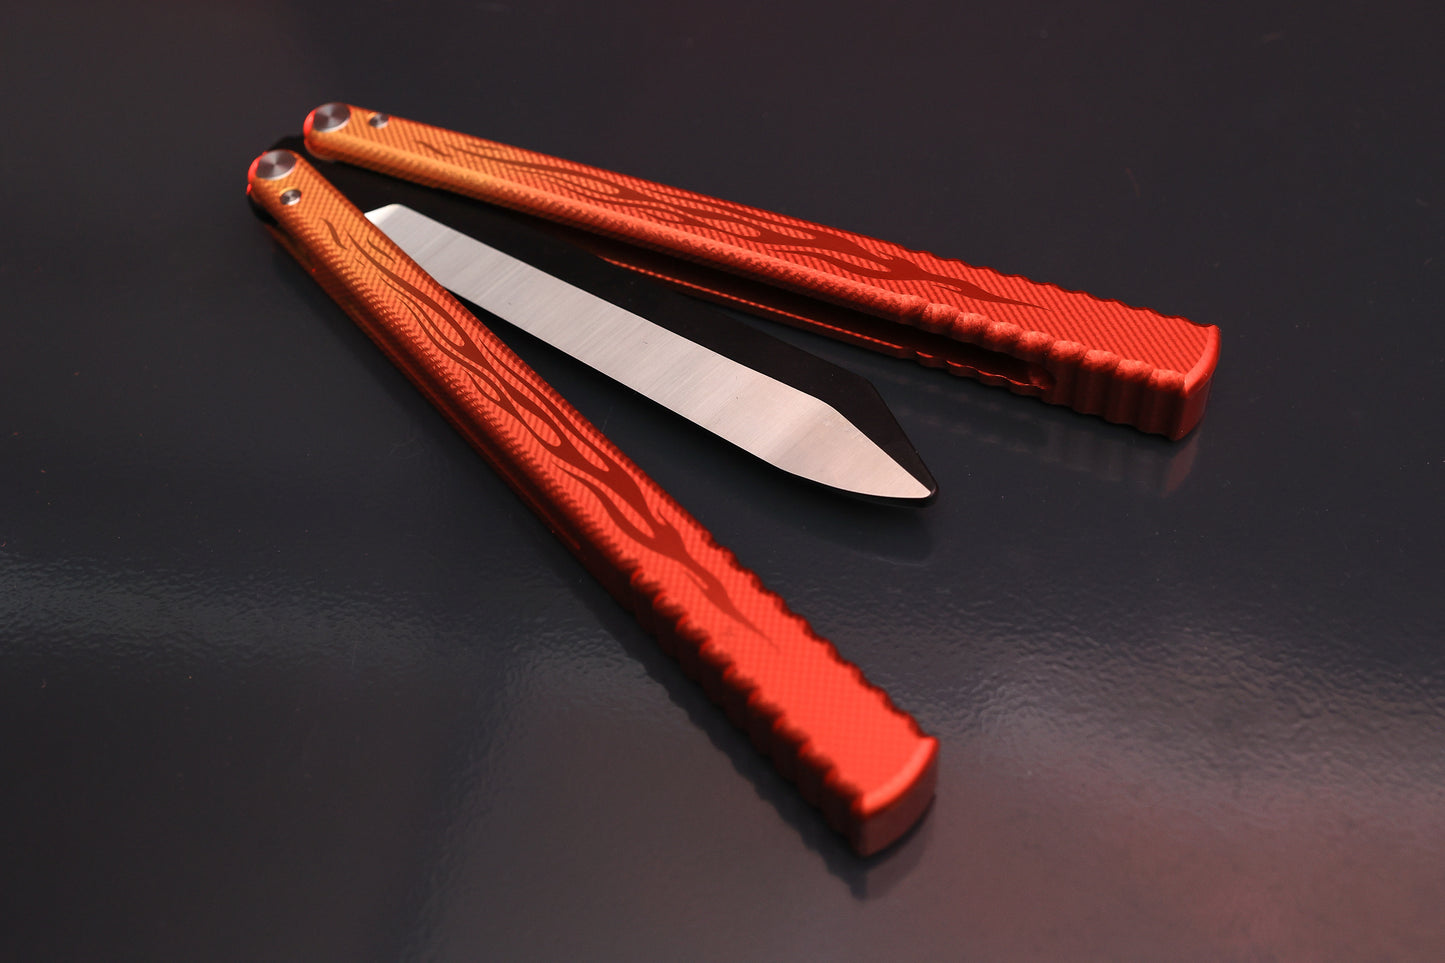 The Flame Balisong Trainer